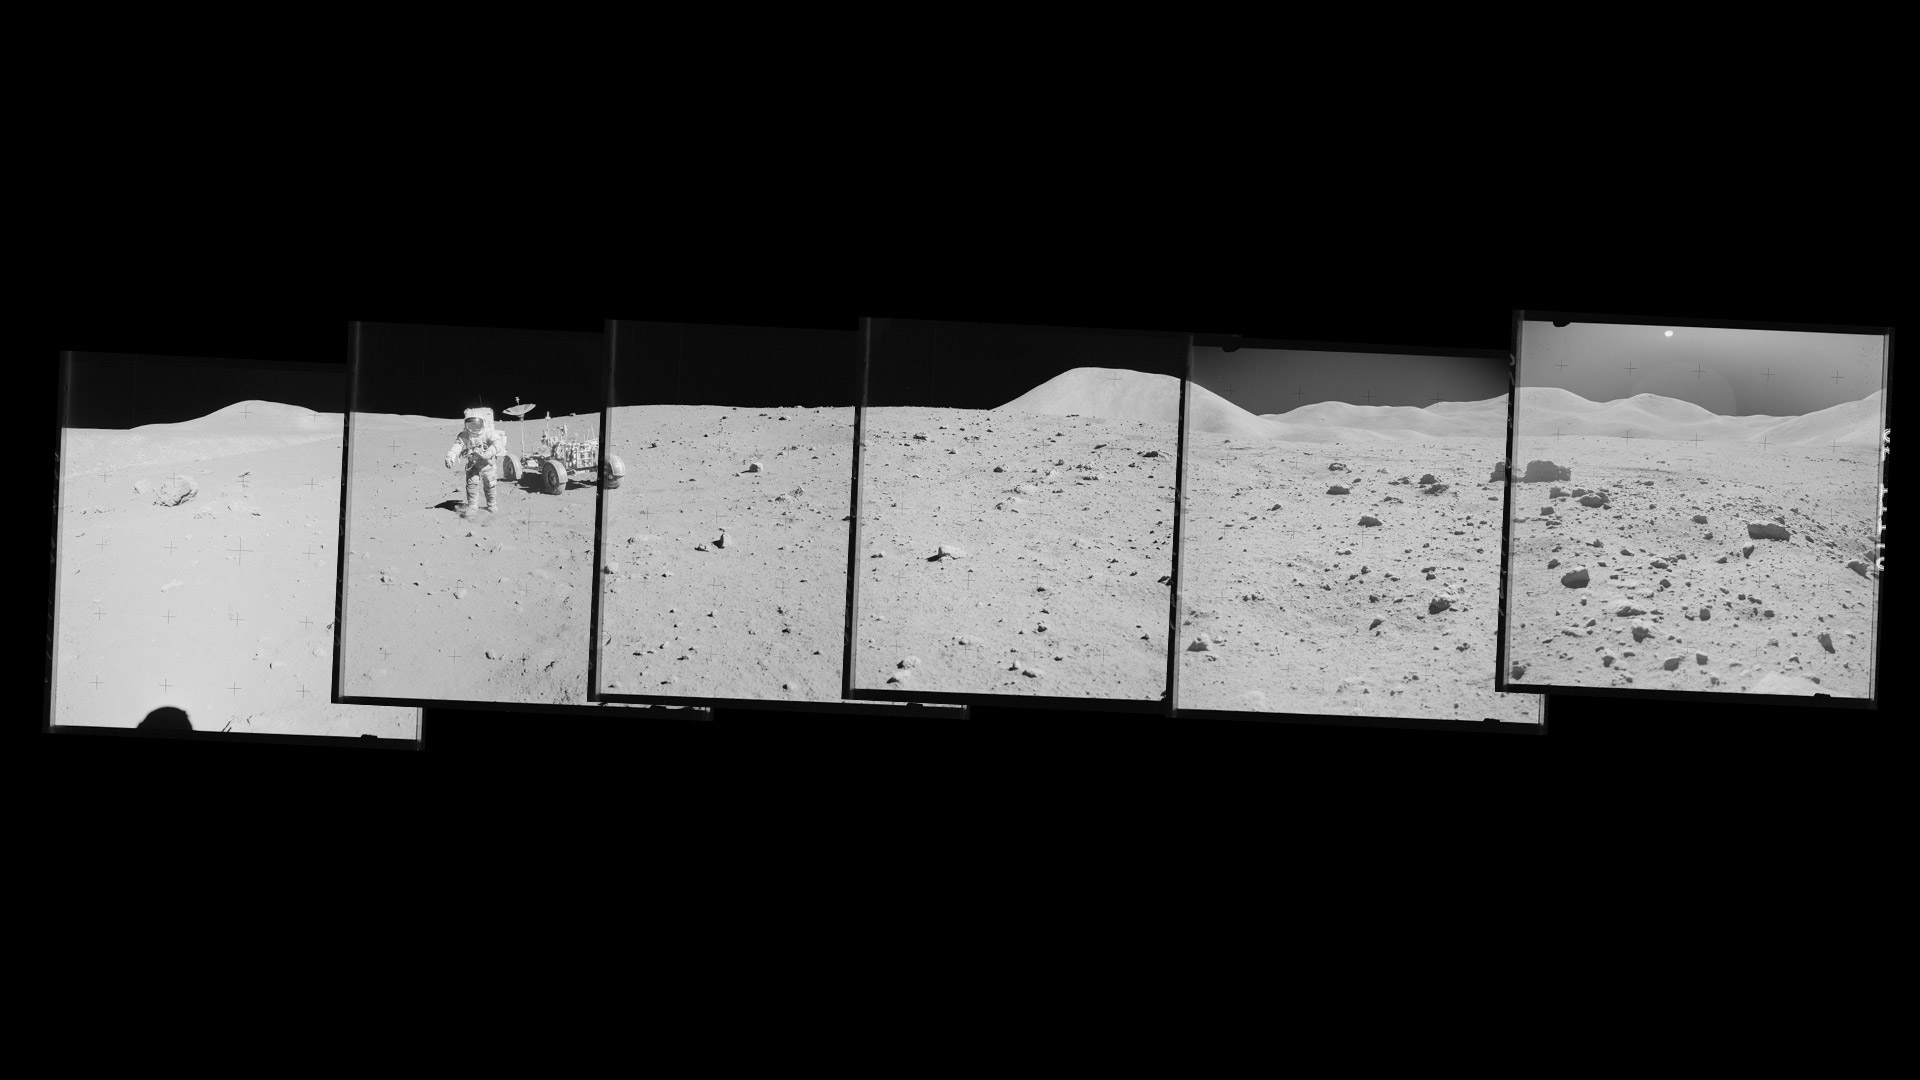 Composite of photographs from the Apollo 15 mission